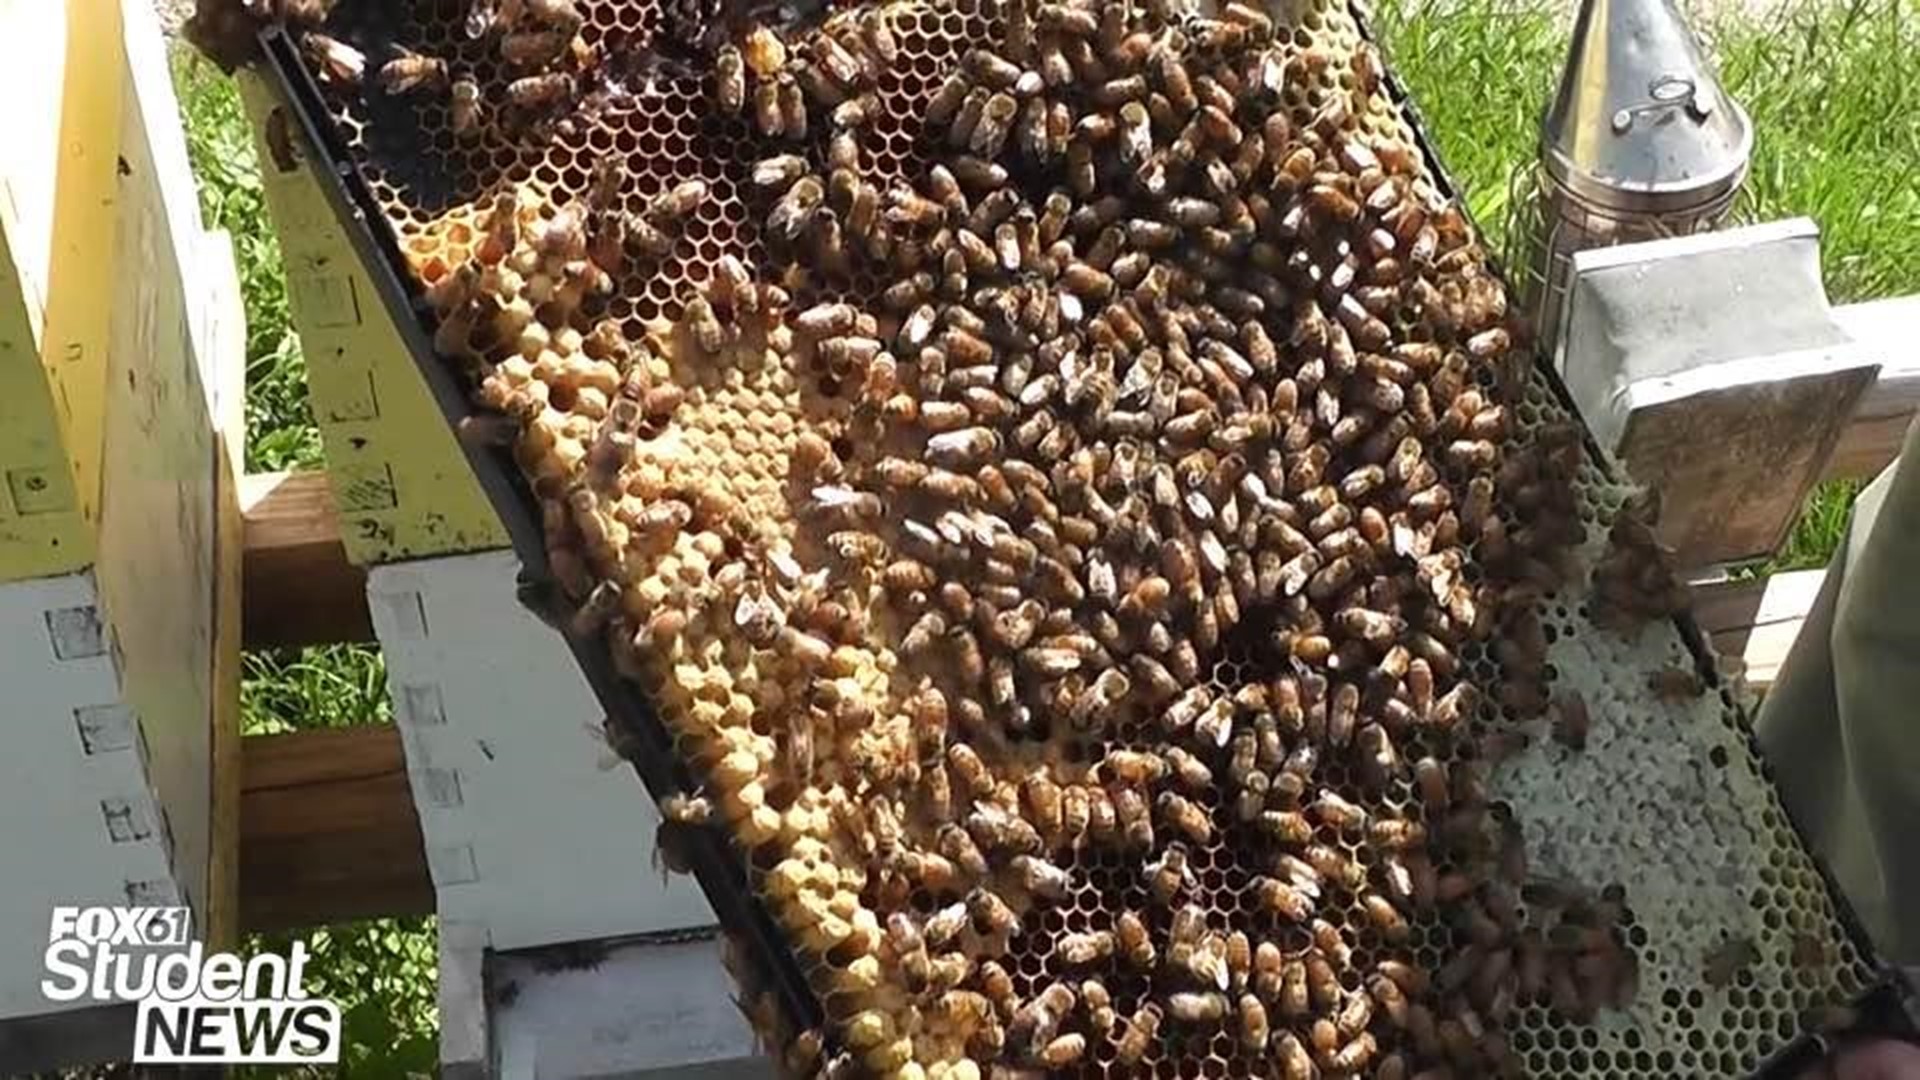 FOX61 Student News: THE IMPORTANCE OF BEES